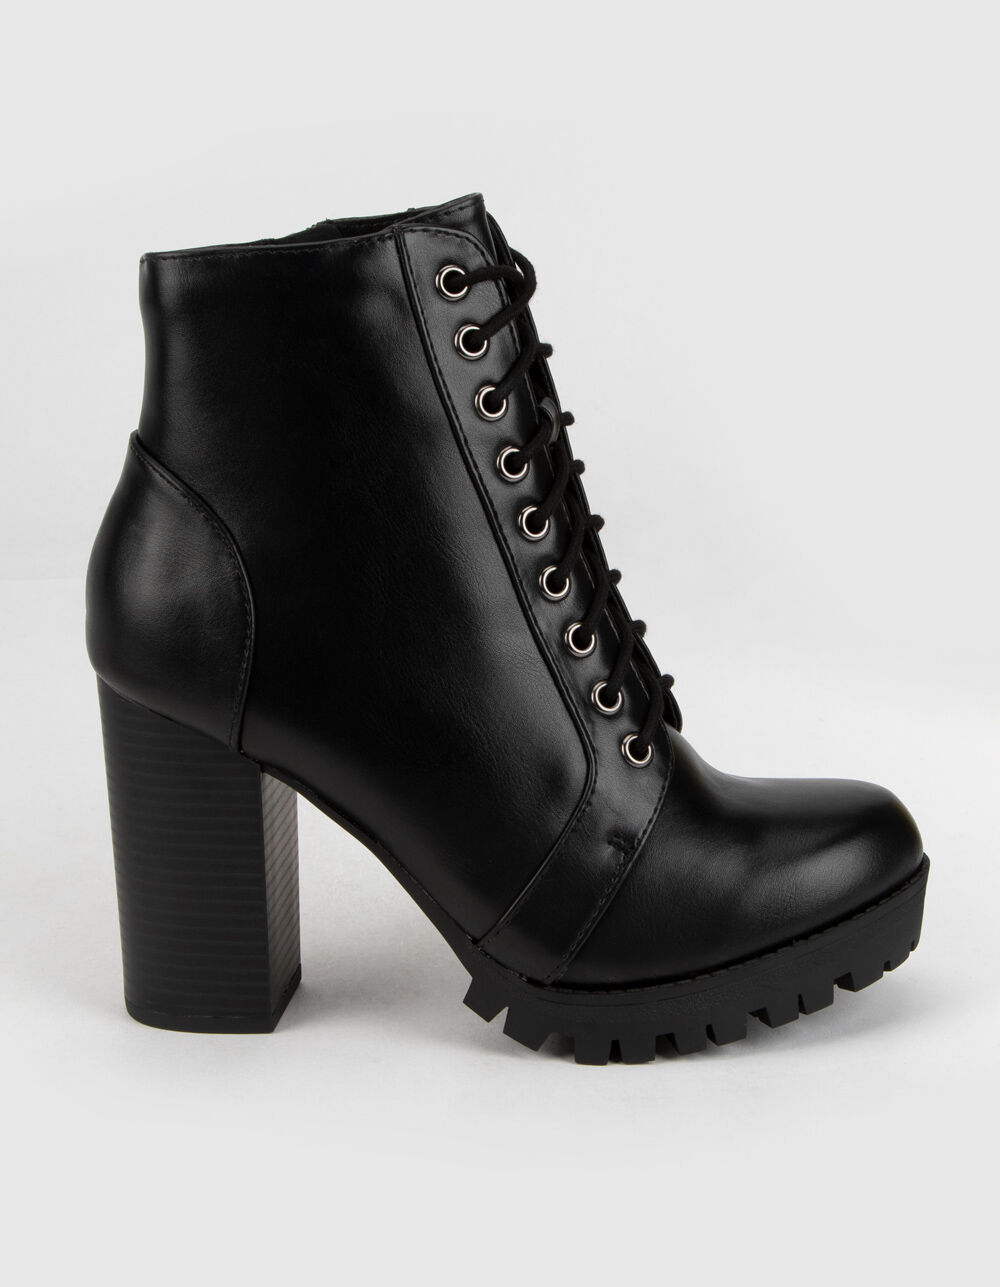 SODA Lace Up Heeled Combat Boots